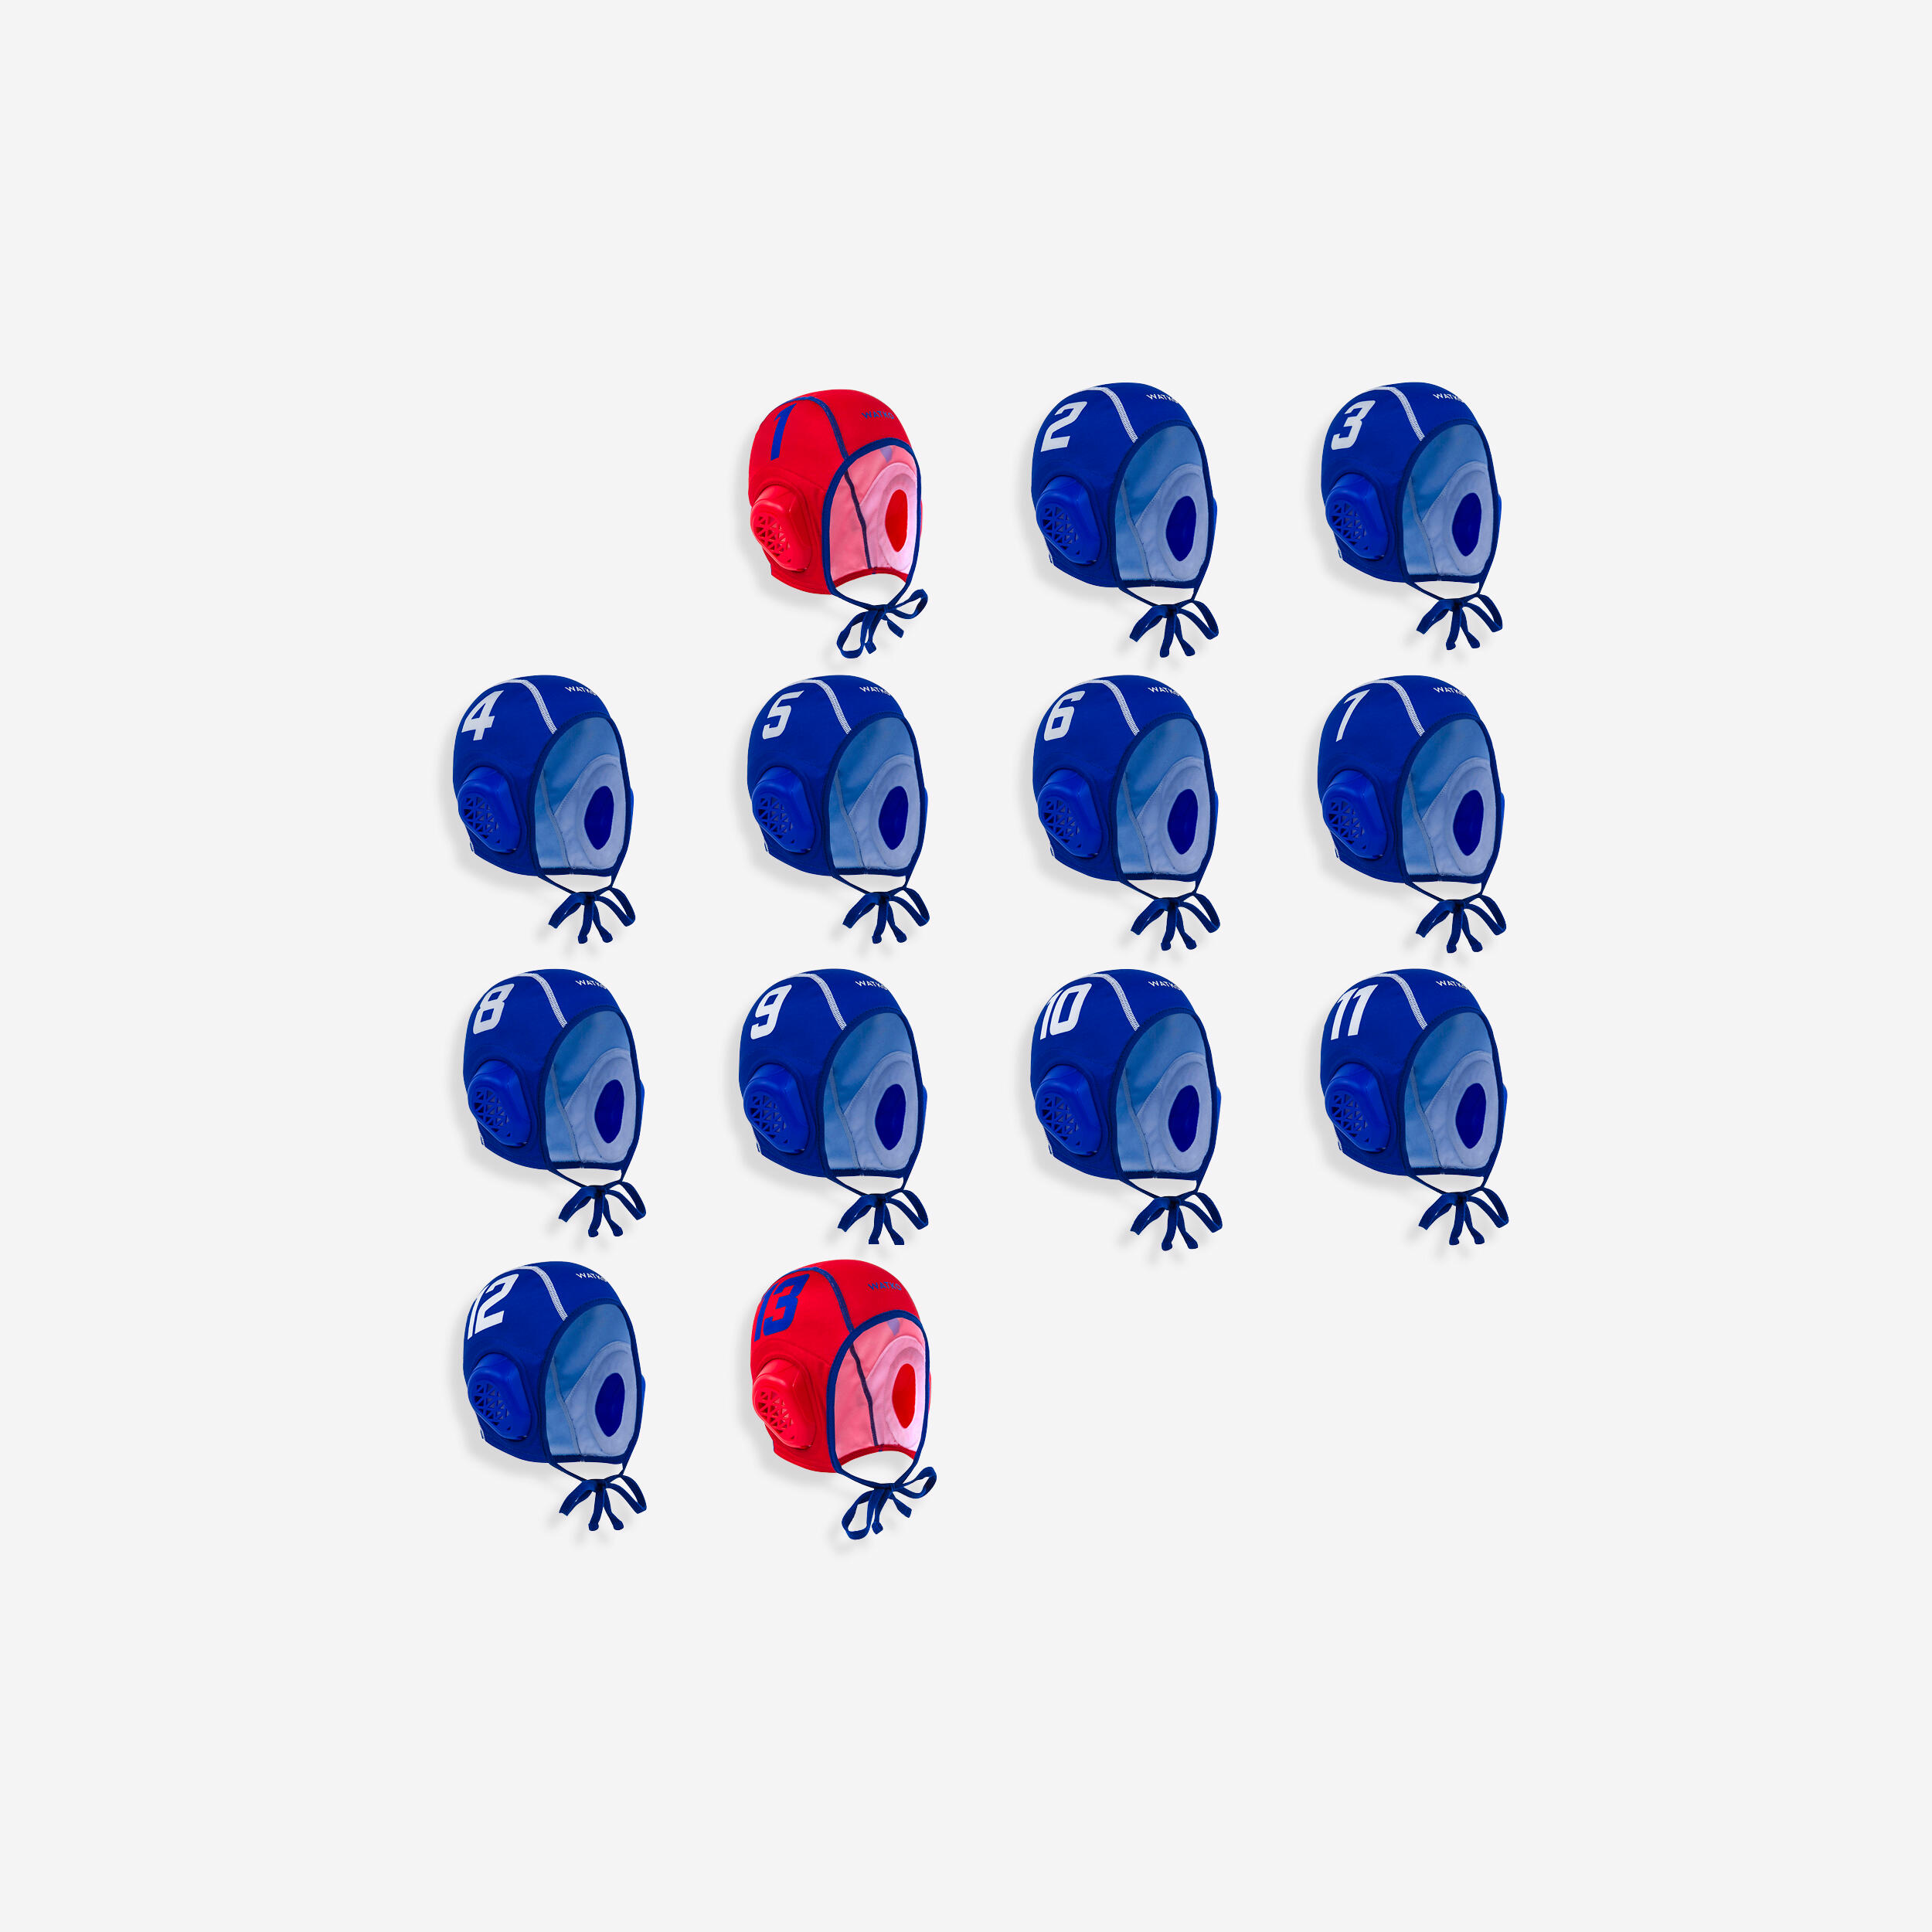 ADULT’S WATER POLO CAPS 900 SET OF 13 - BLUE 1/7